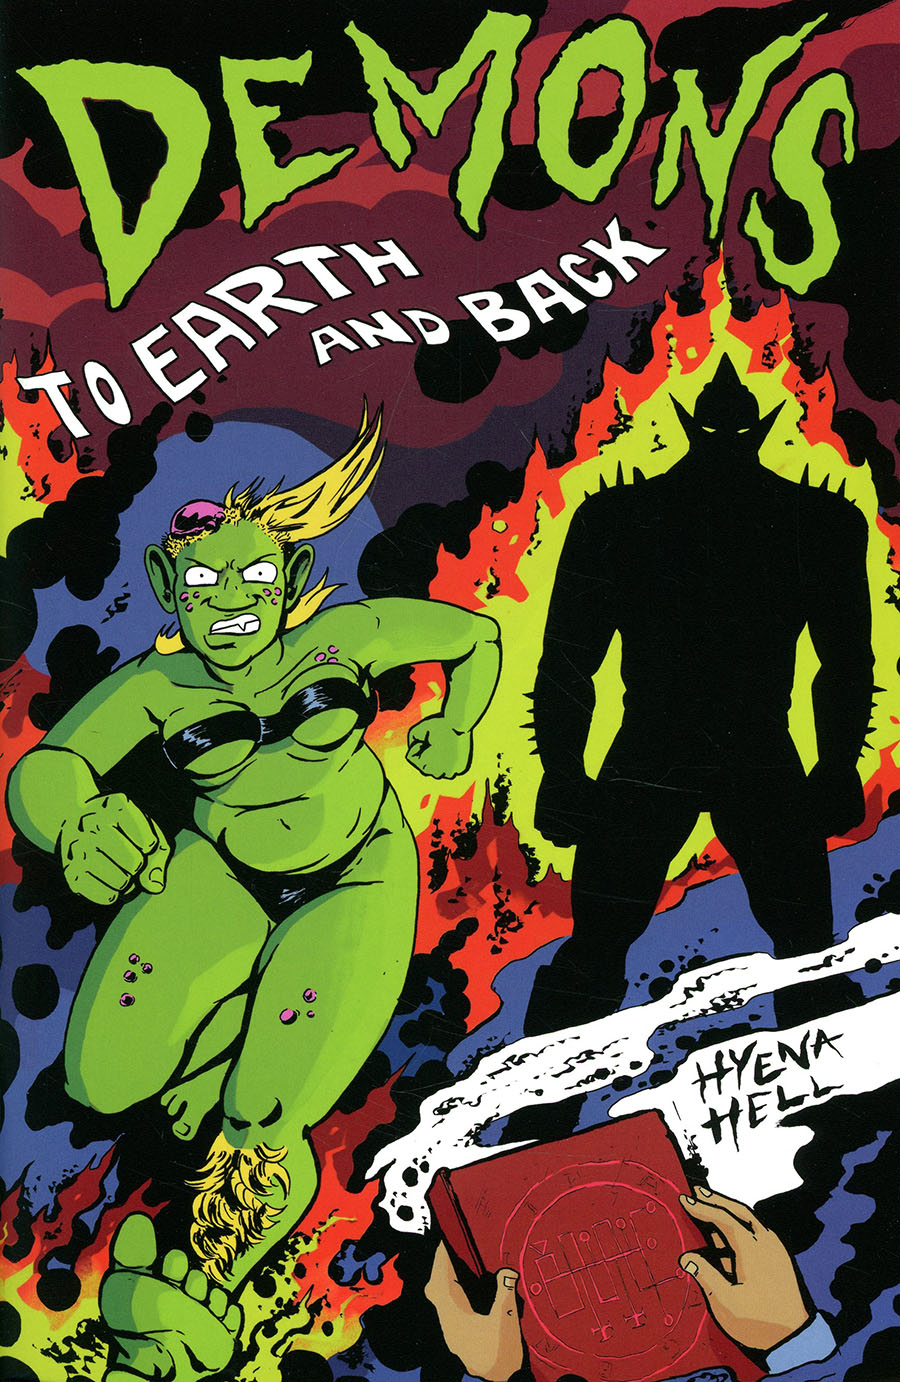 Demons To Earth And Back #1 (One Shot)